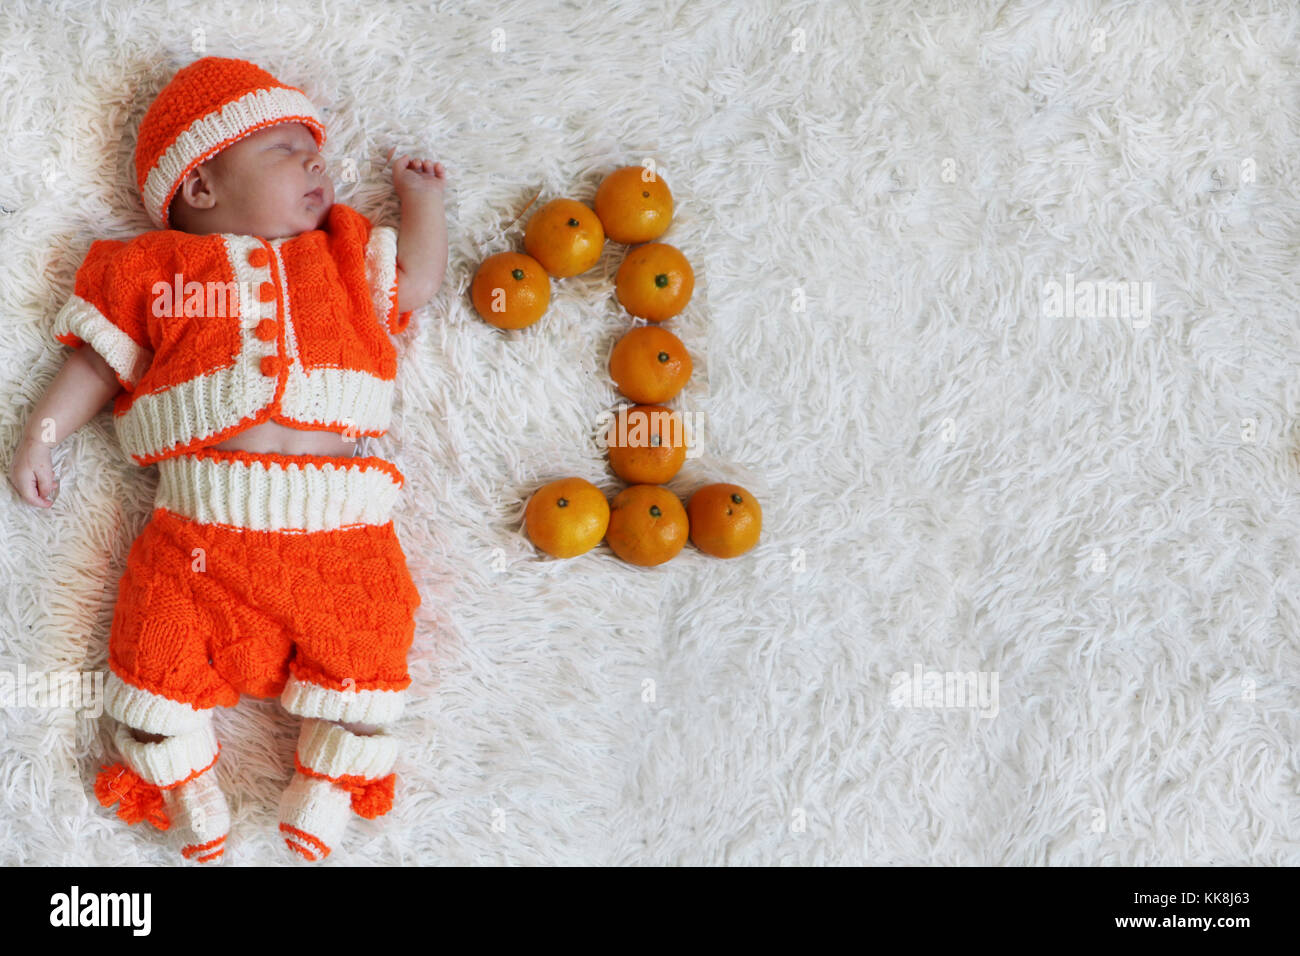 One month baby. Sleeping  newborn baby one month old  in orange knitted costume on white fur blanket with numeral one next to him and space for text.  Stock Photo